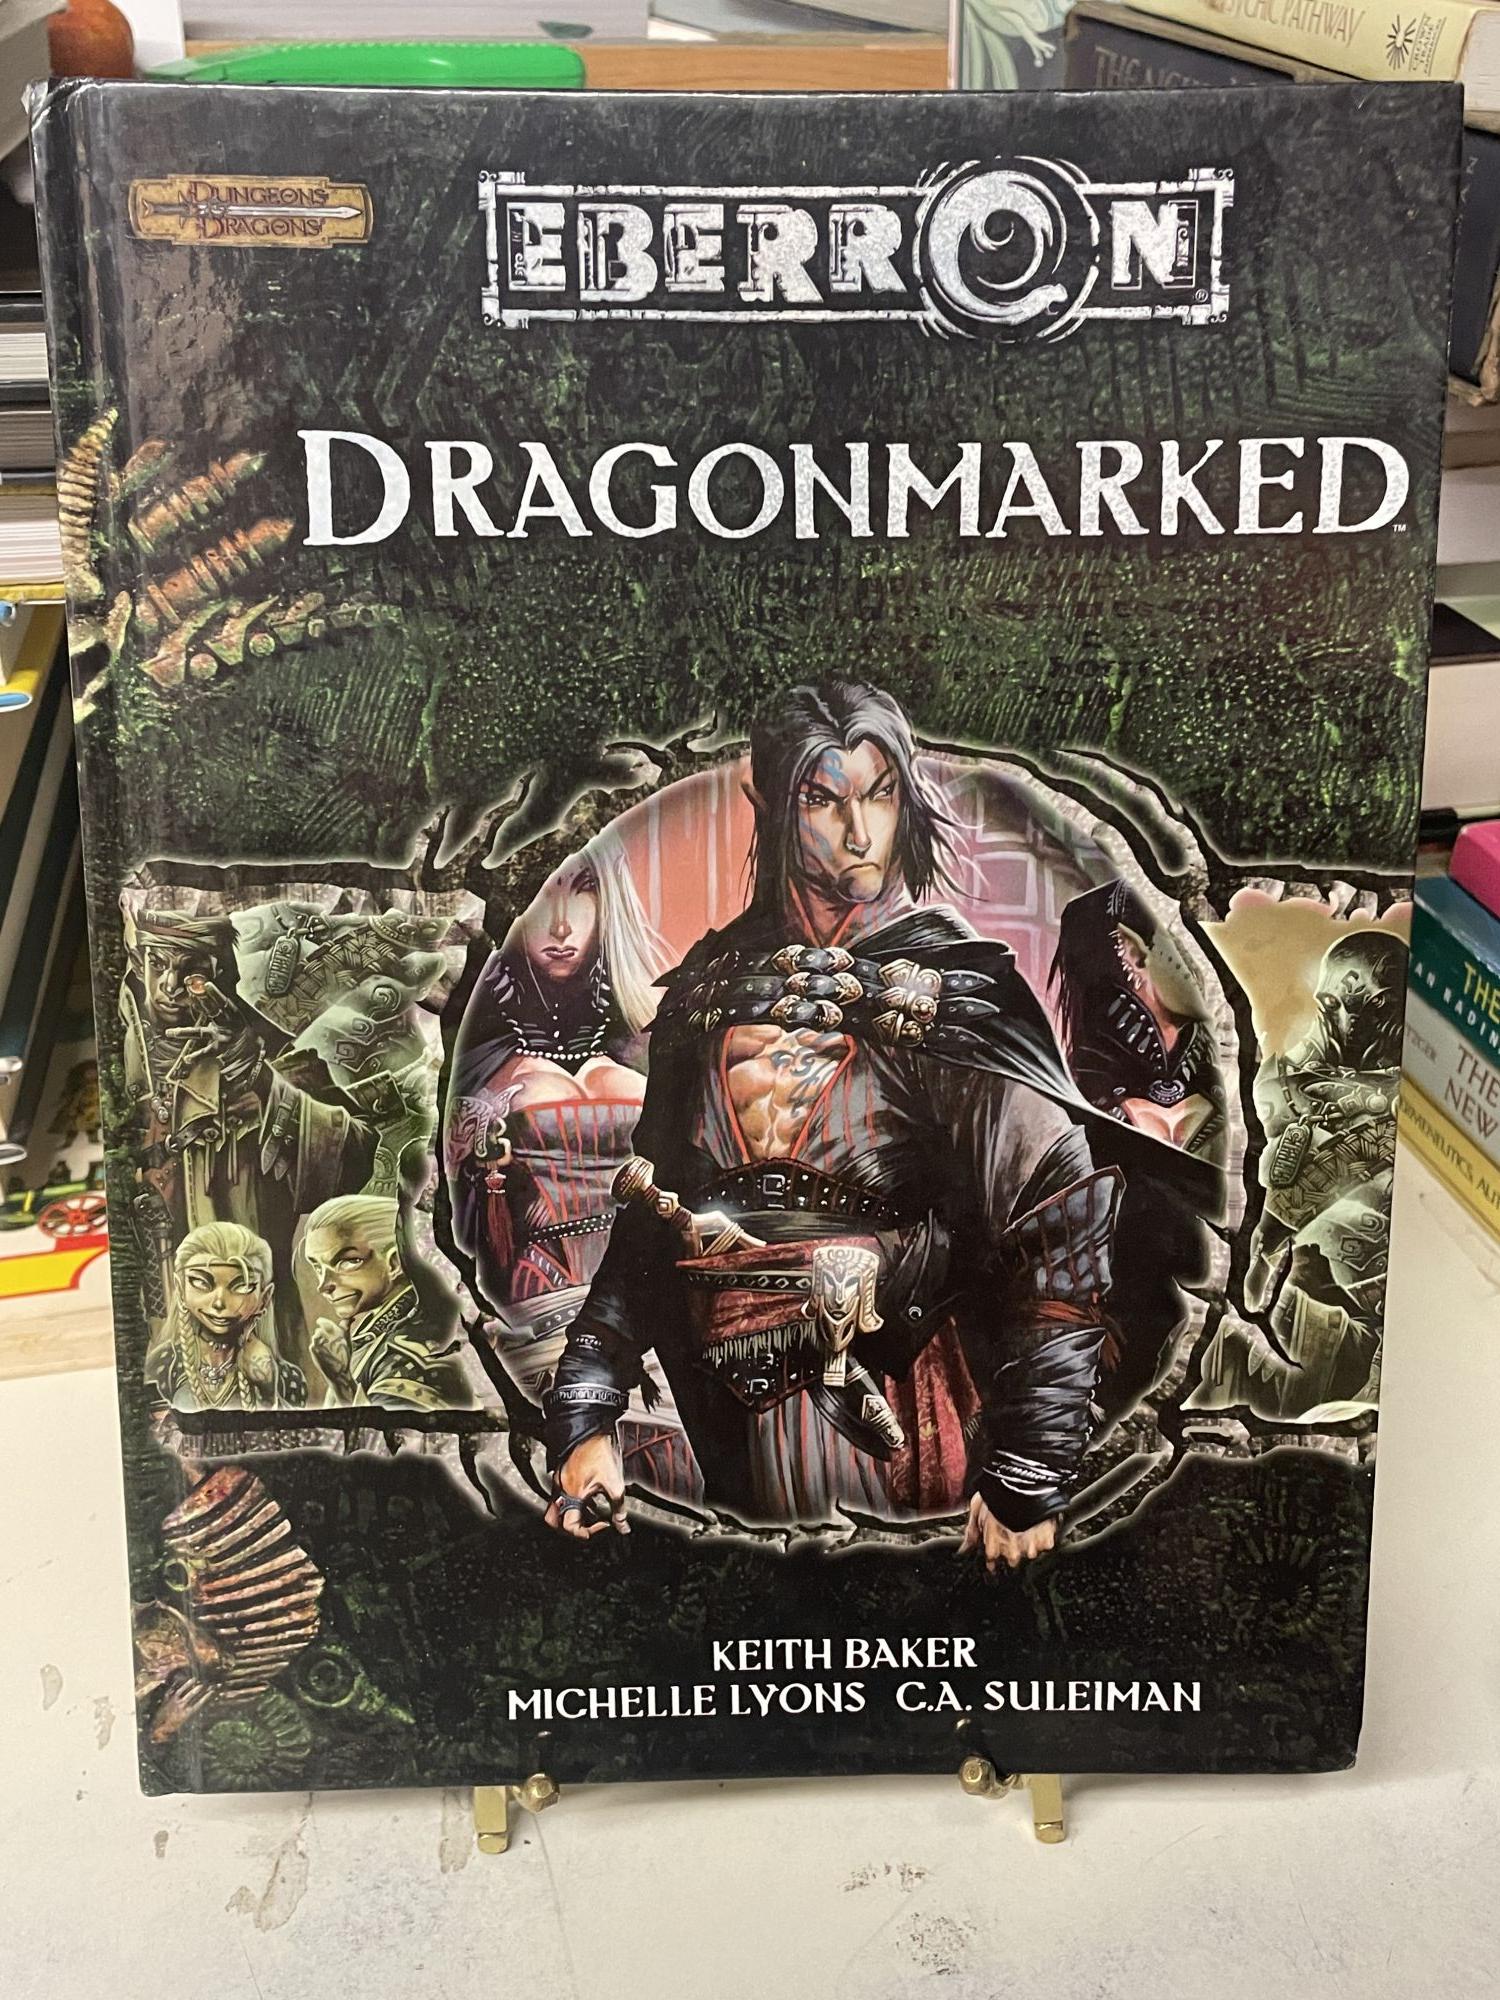 Dragonmarked (Dungeons & Dragons d20 3.5 Fantasy Roleplaying, Eberron Supplement) - Baker, Keith